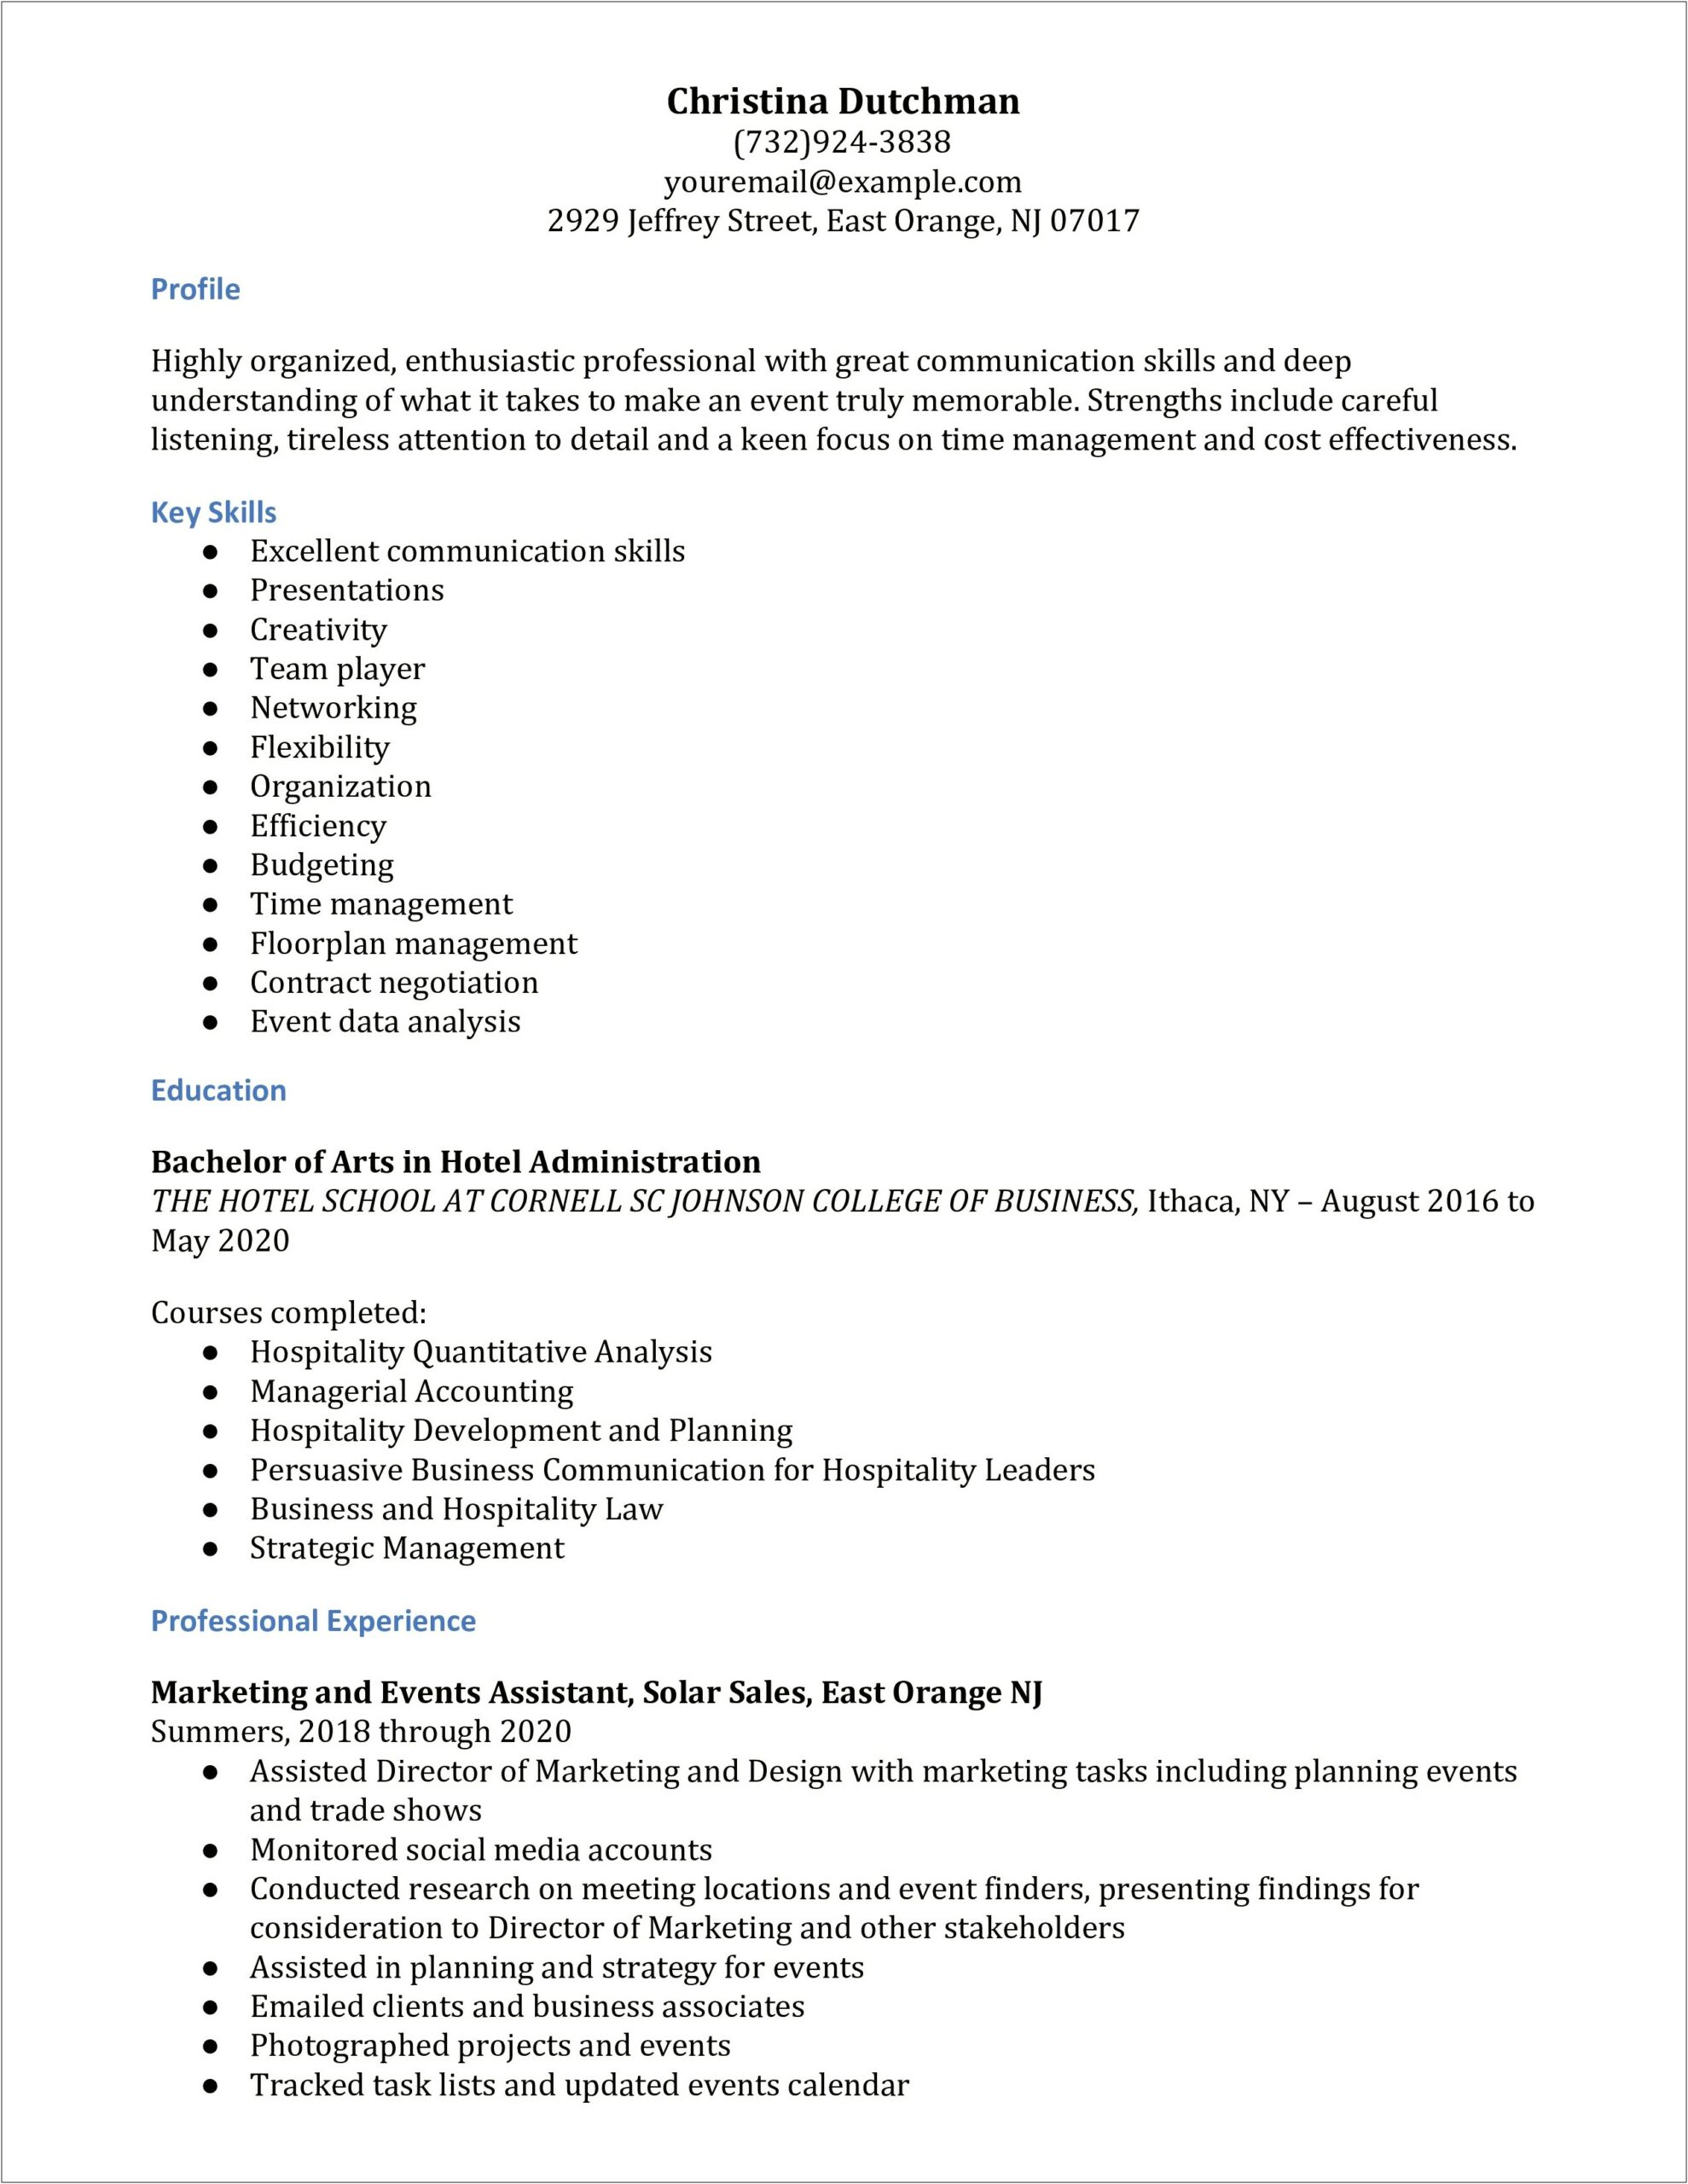 Resume Examples For Event Plannners